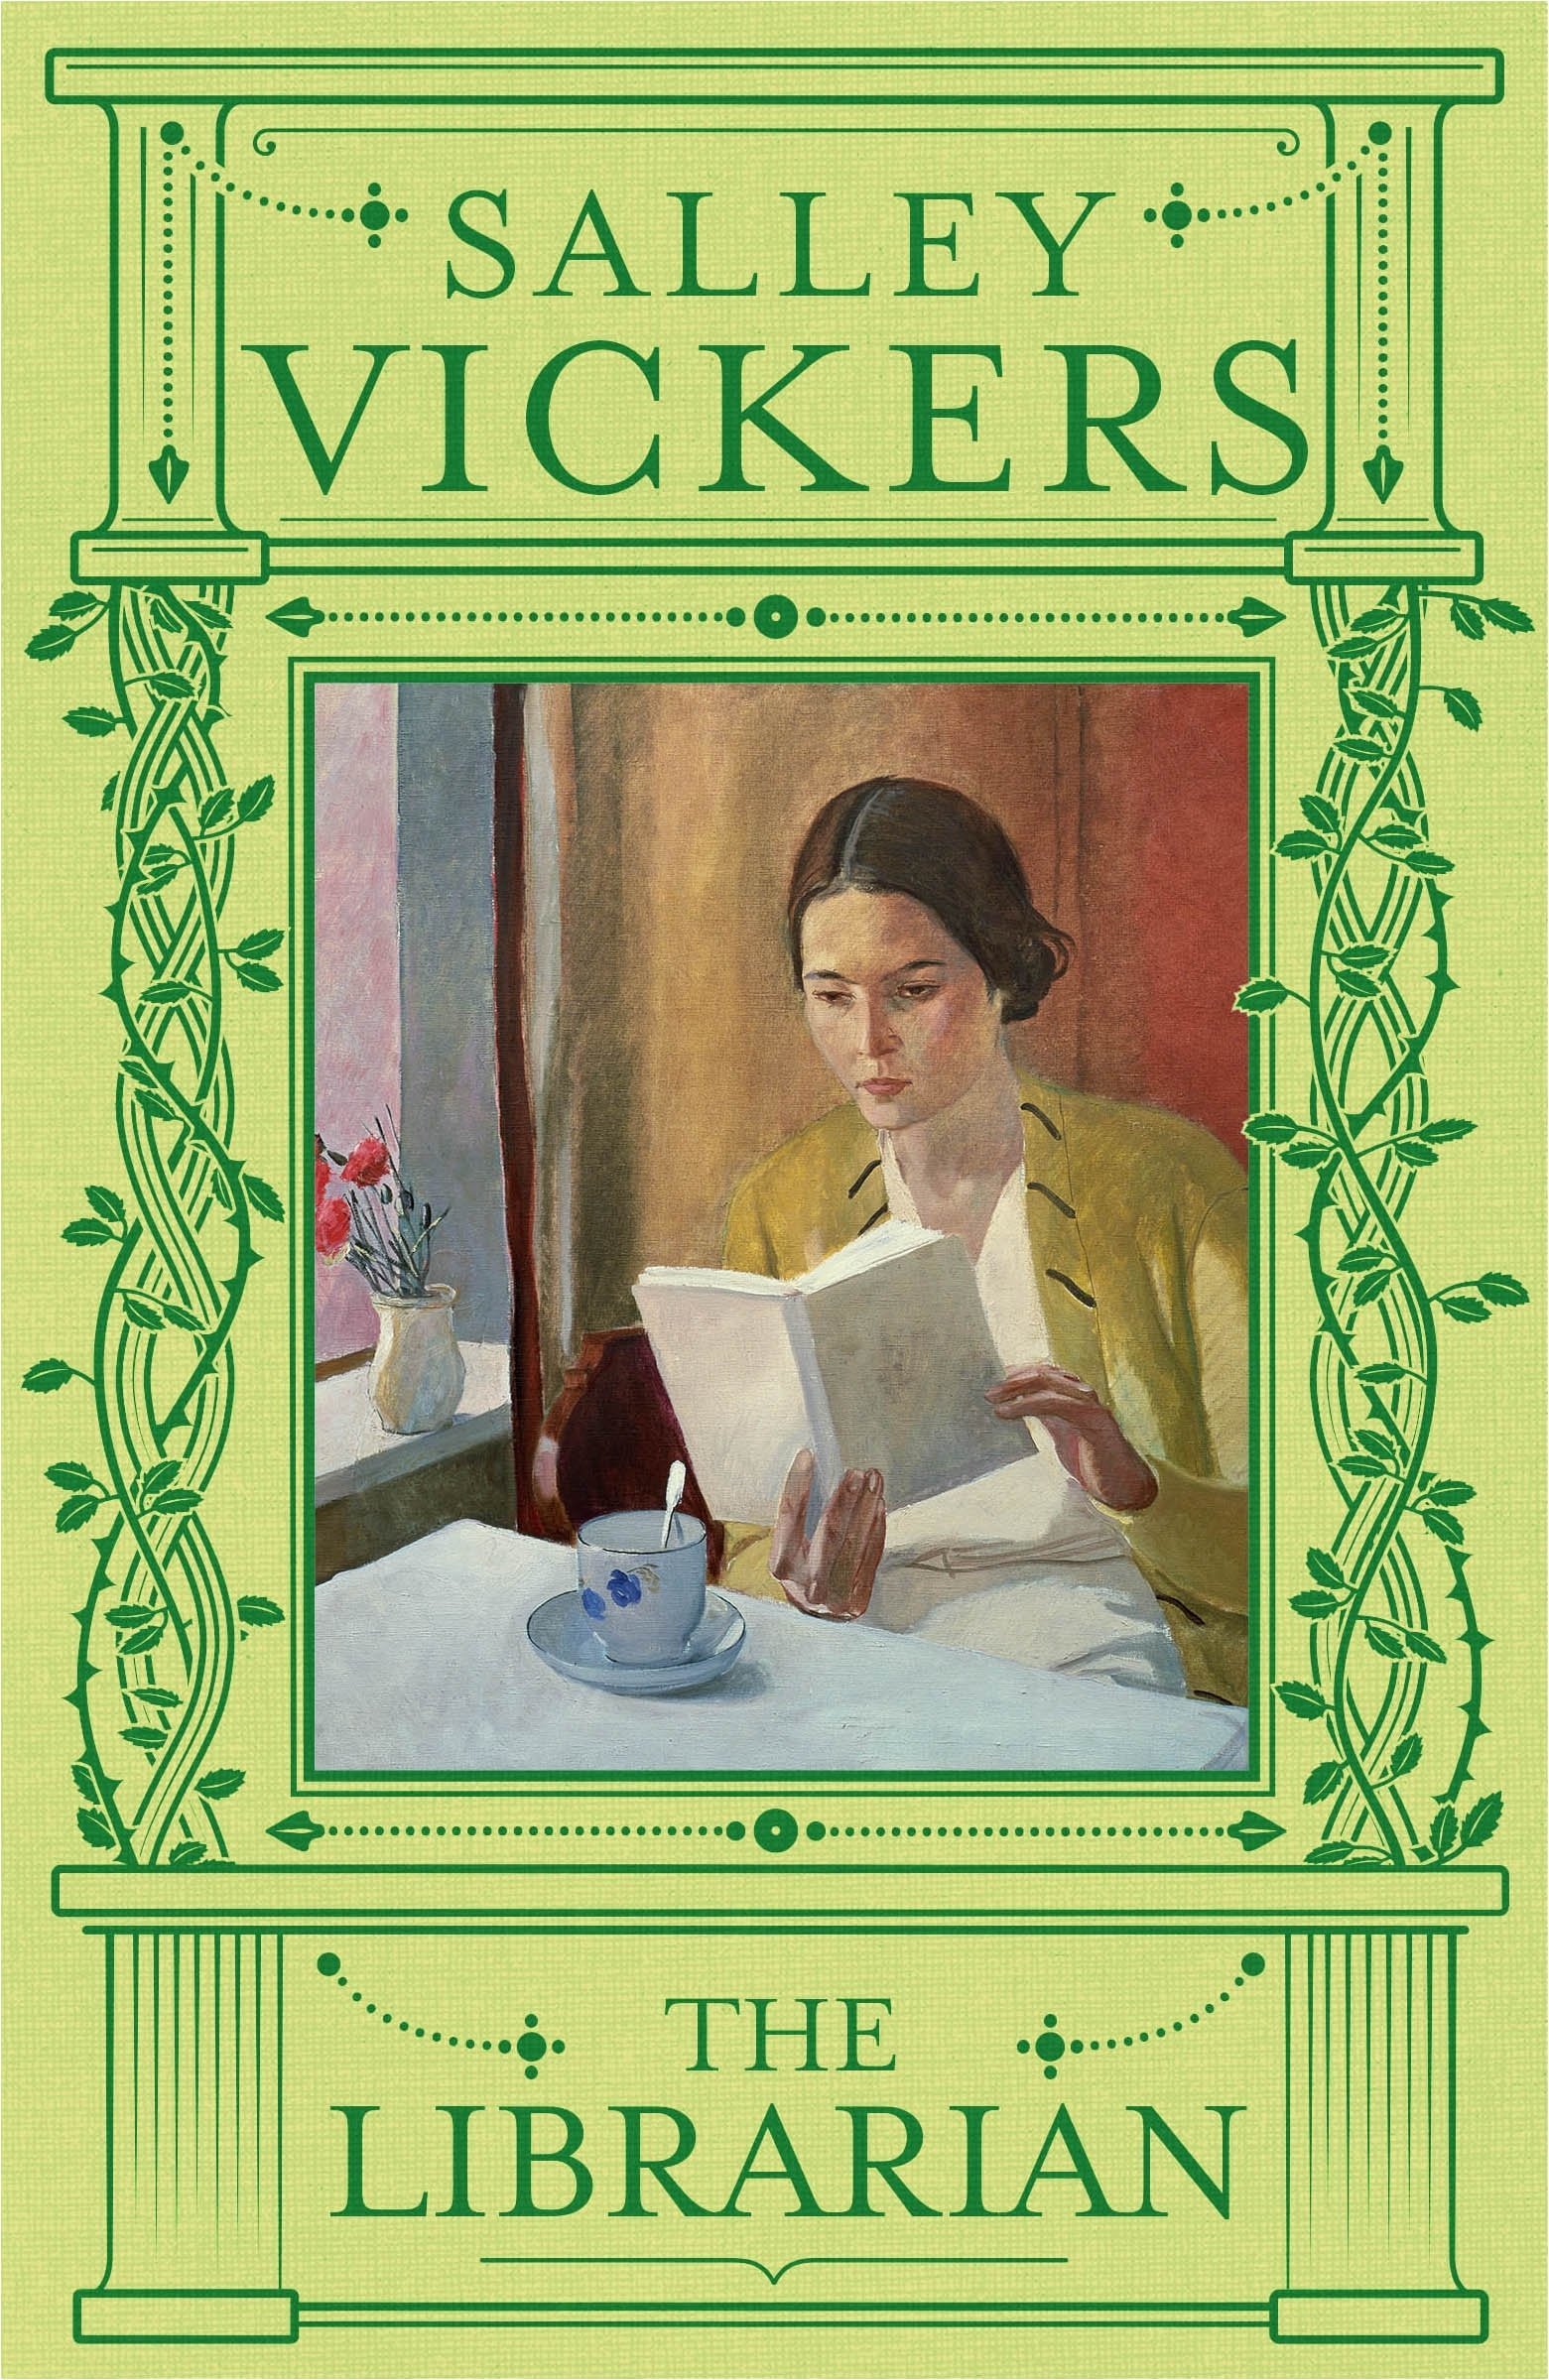 Salley Vickers: Librarian (2018, Penguin Books, Limited)